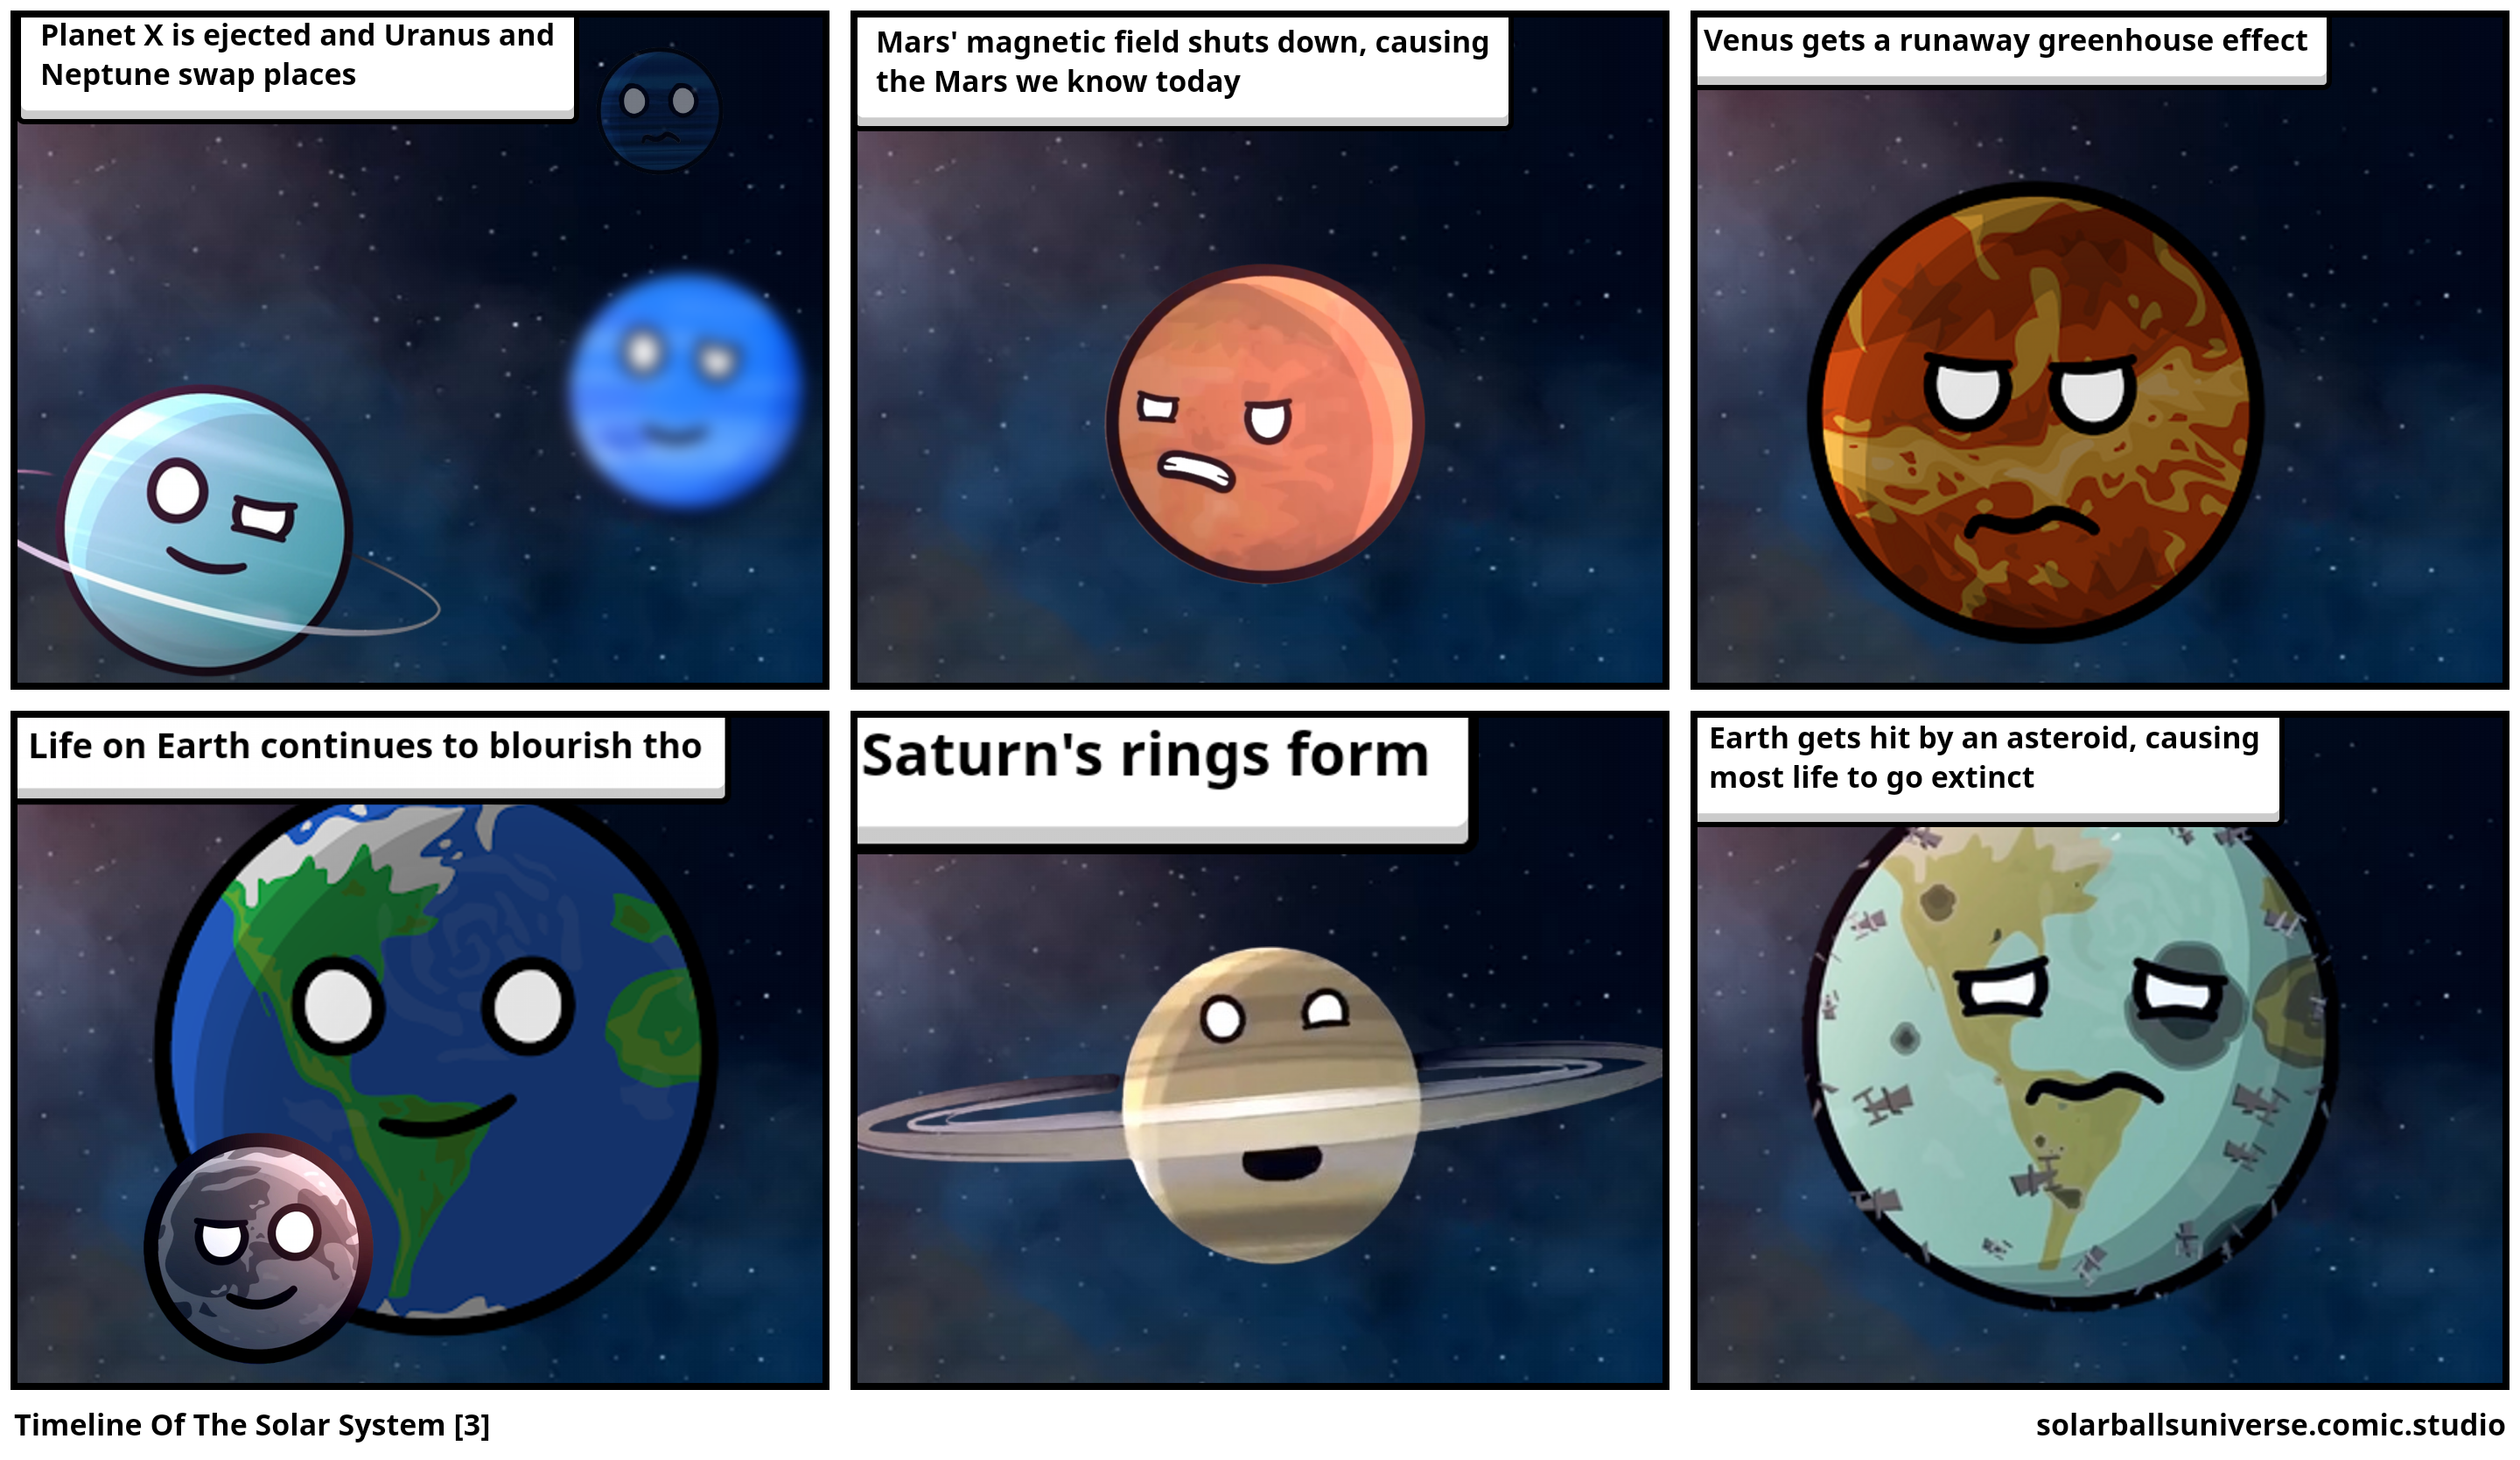 Timeline Of The Solar System [3]